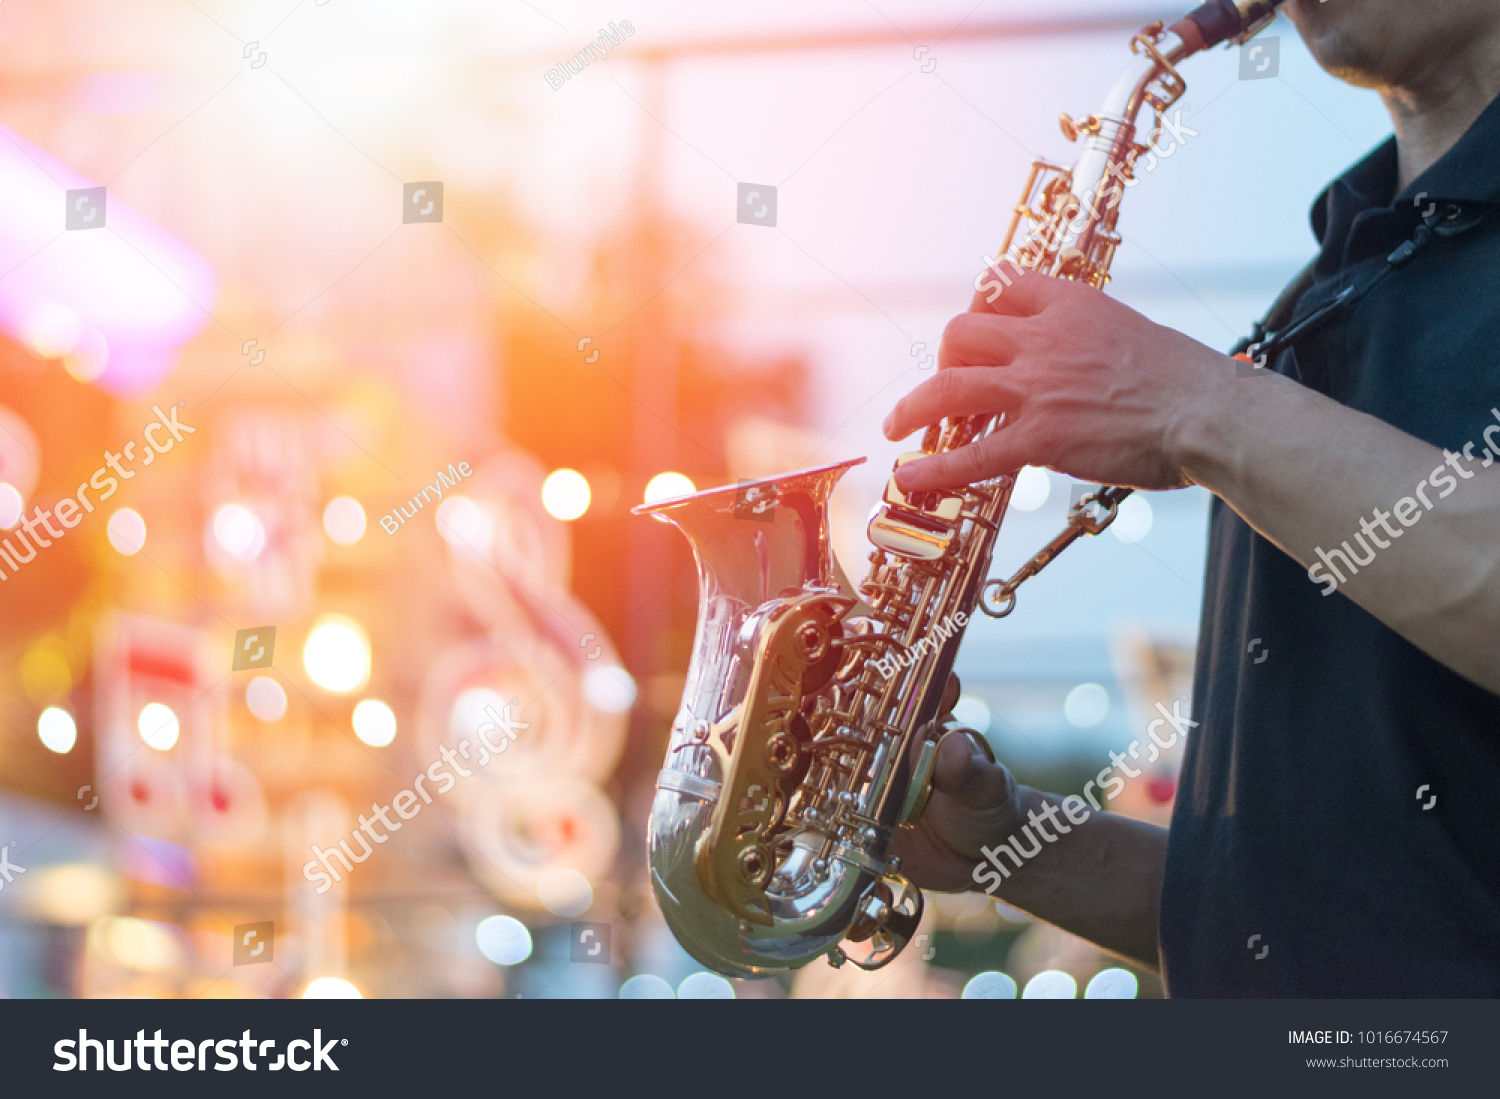 jazz festival. Saxophone, music instrument played by saxophonist player musician in fest. #1016674567